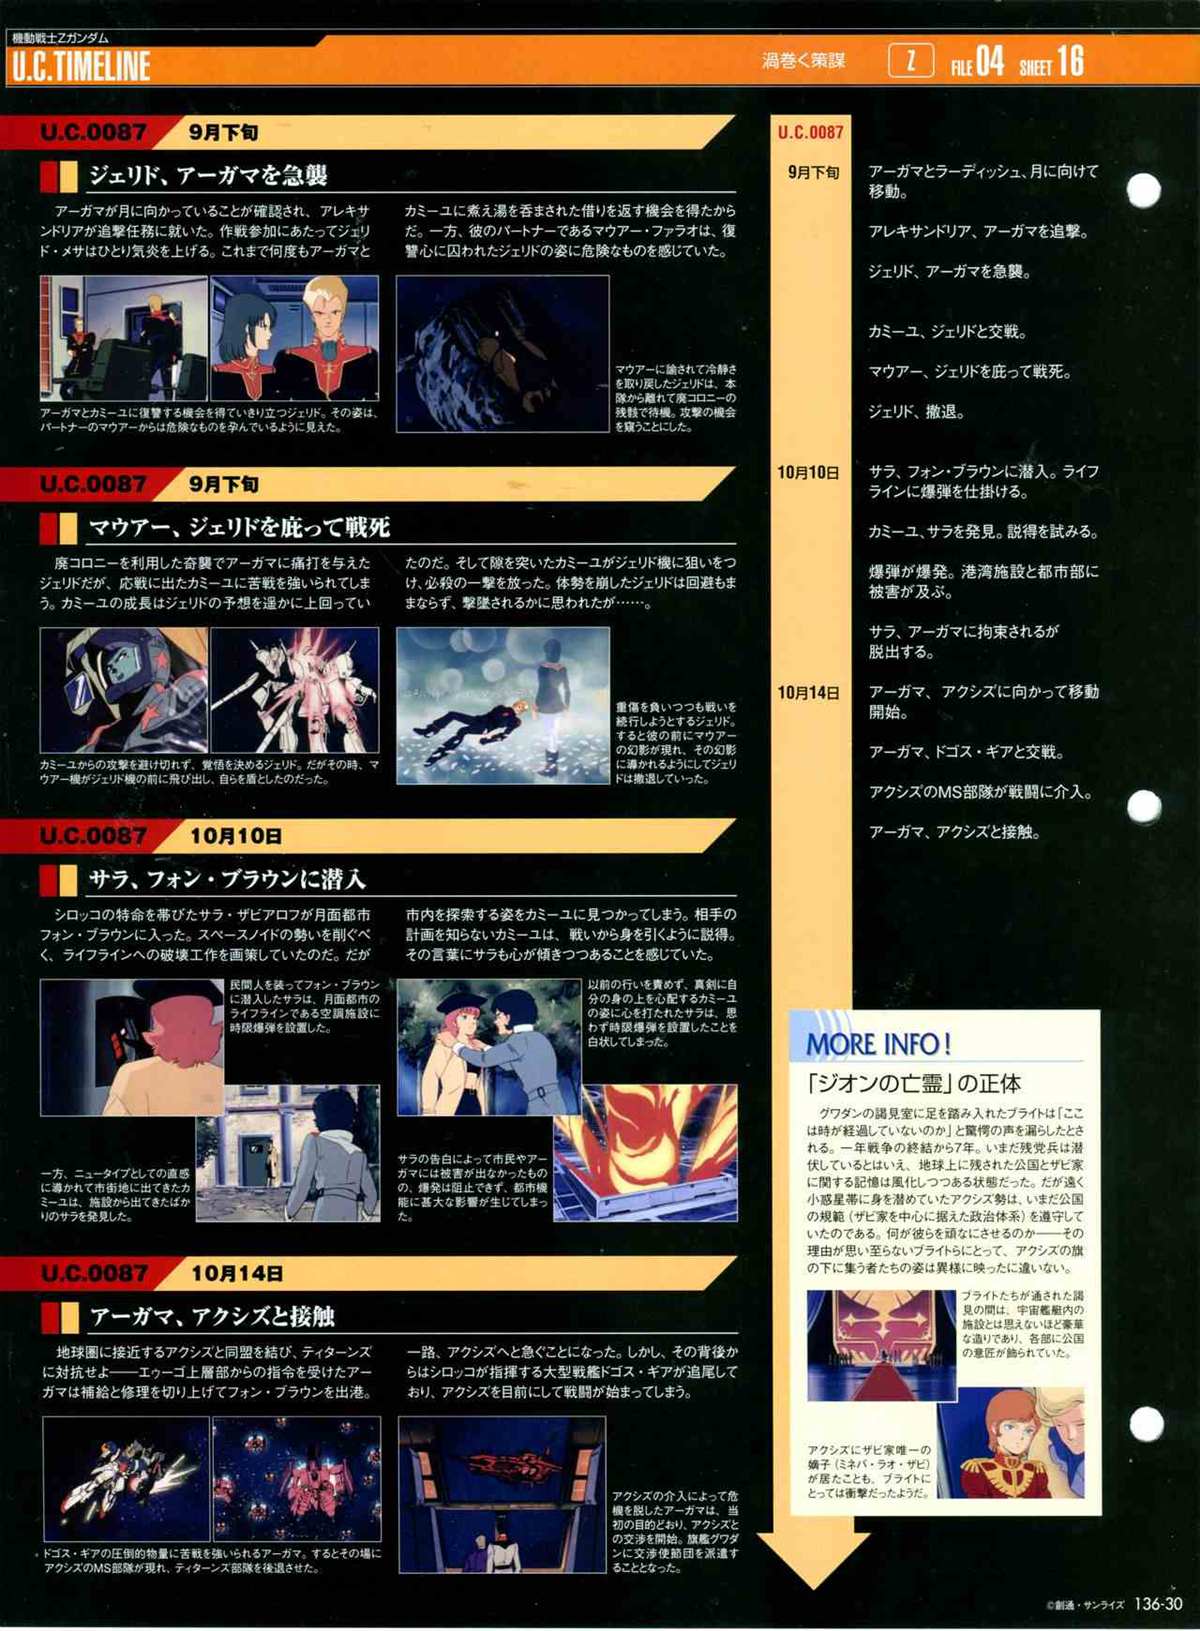 The Official Gundam Perfect File  - 第136話 - 4